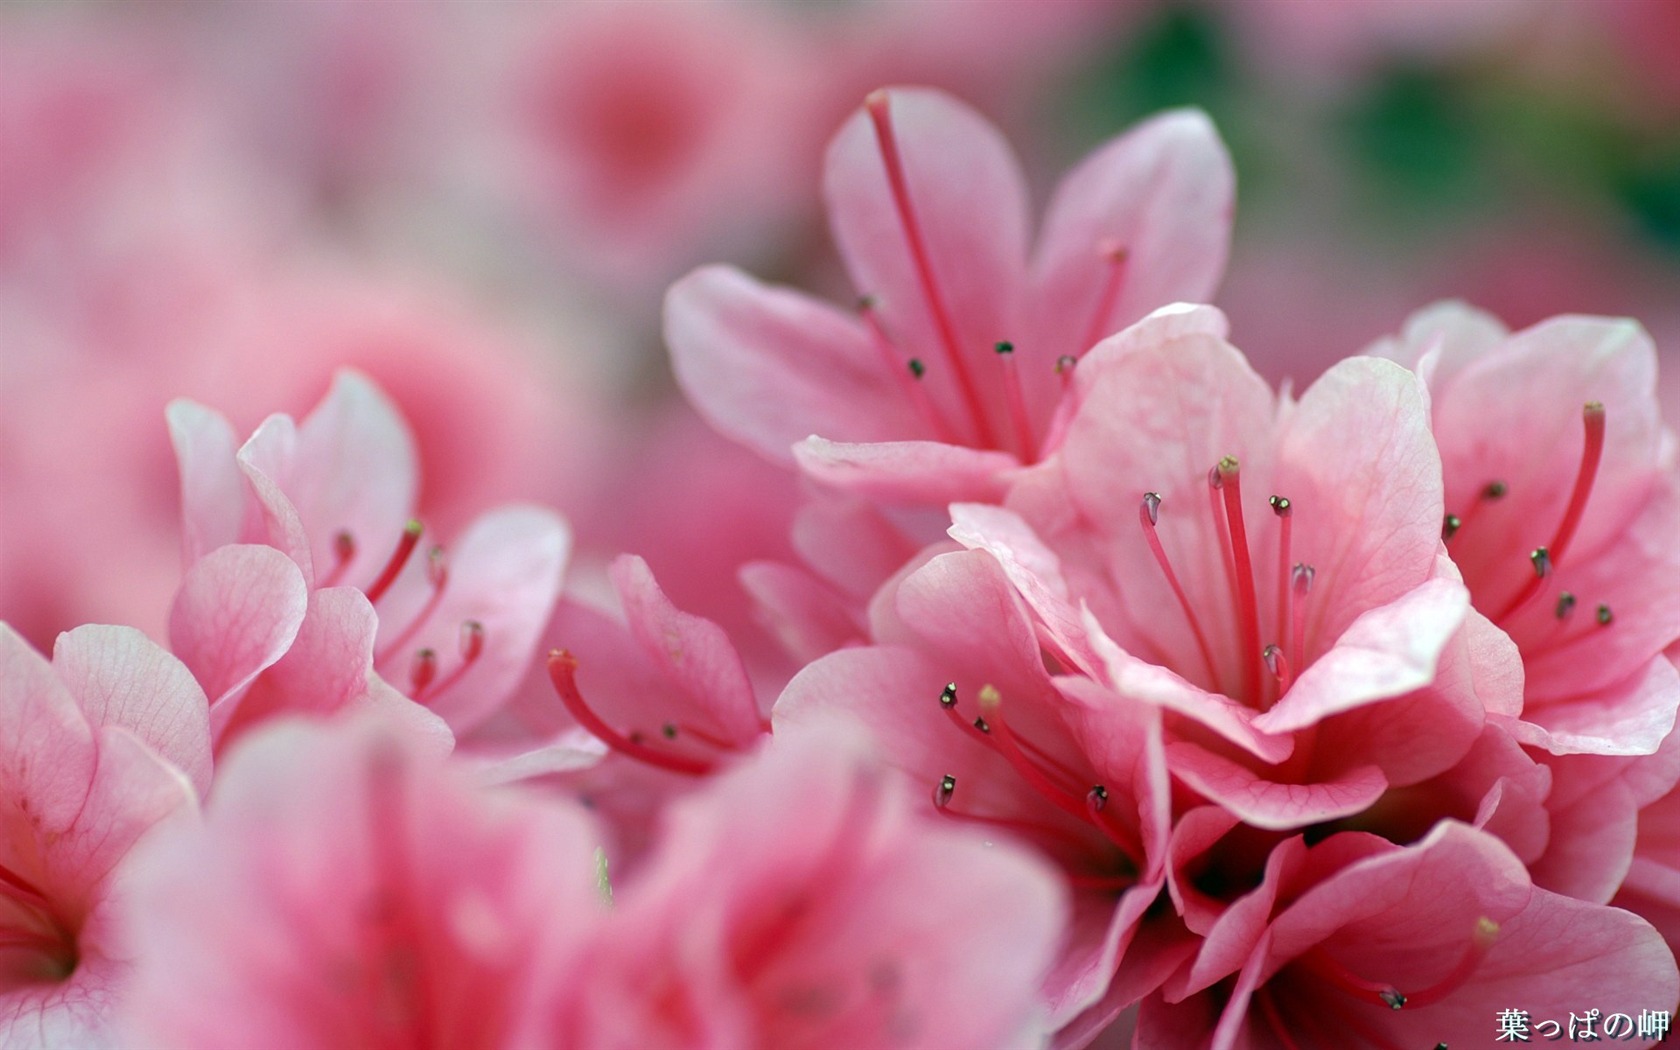 Personal Flowers HD Wallpapers #45 - 1680x1050